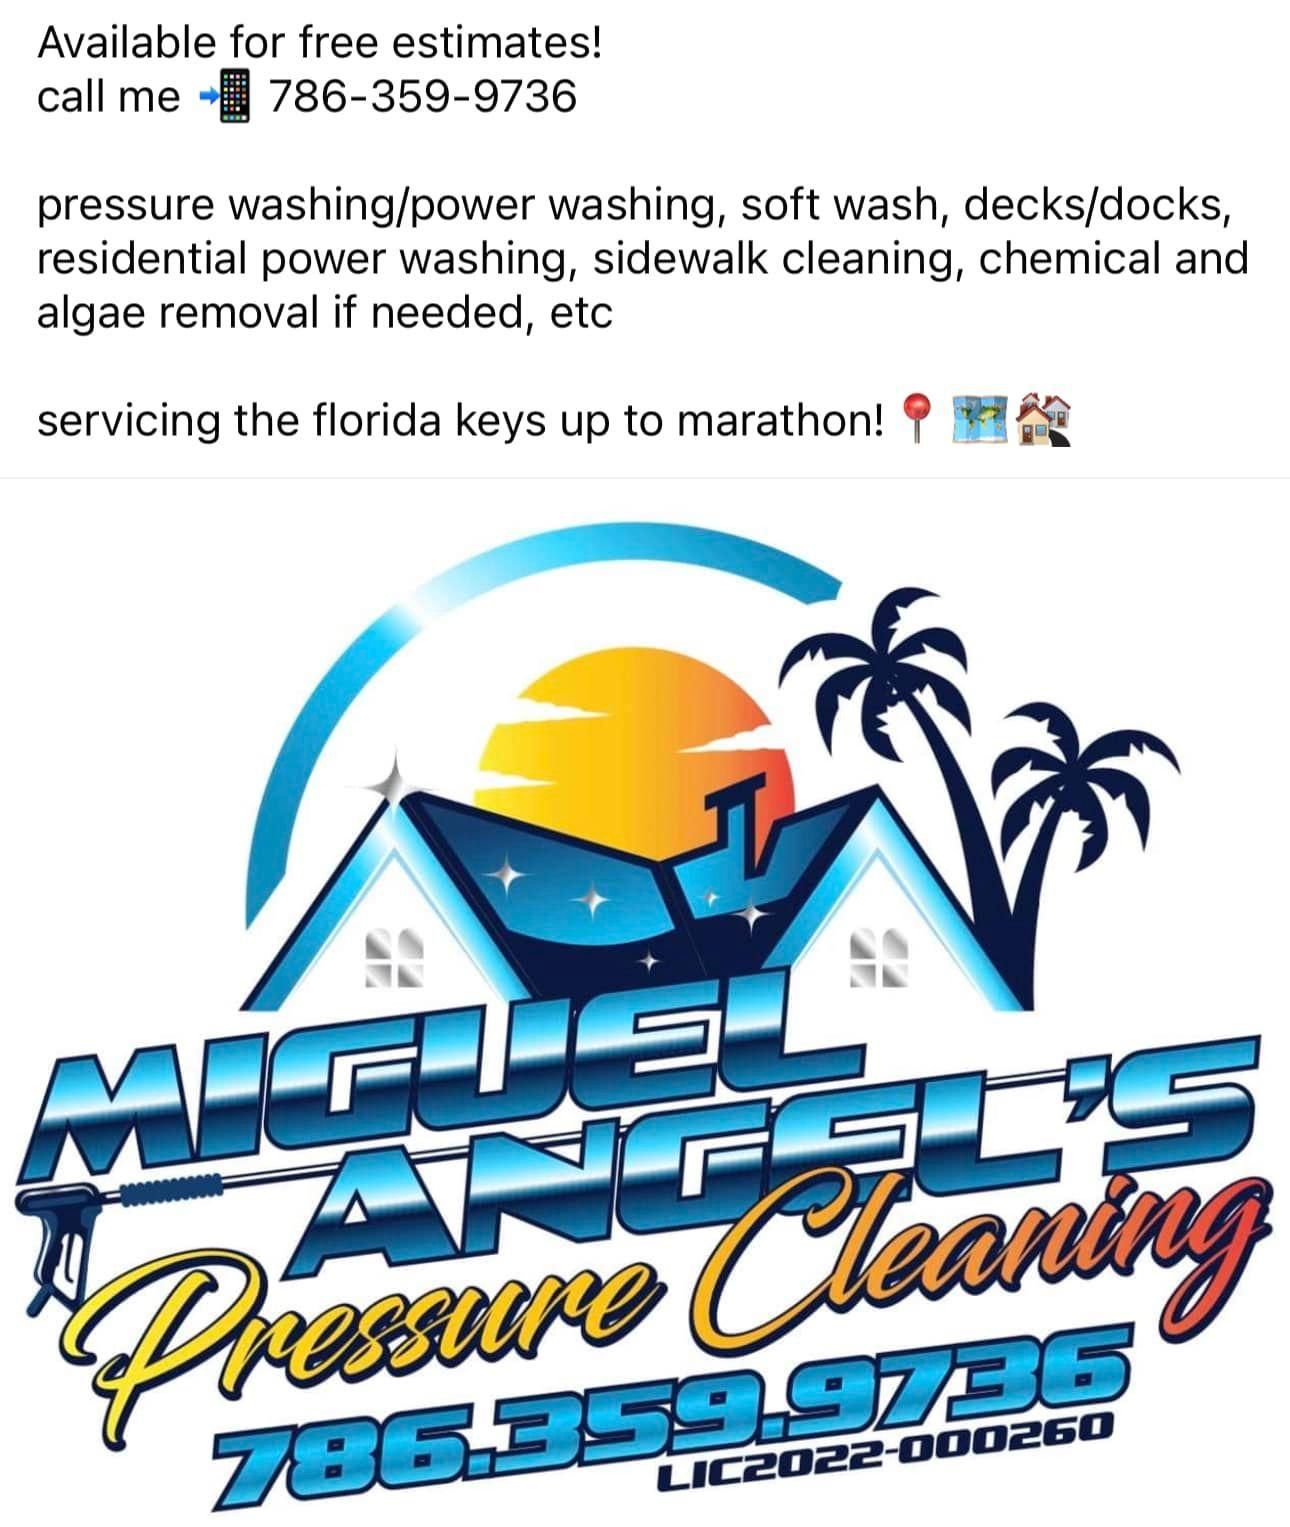 All Photos for Miguel Angel’s Pressure Cleaning in Key West, Florida